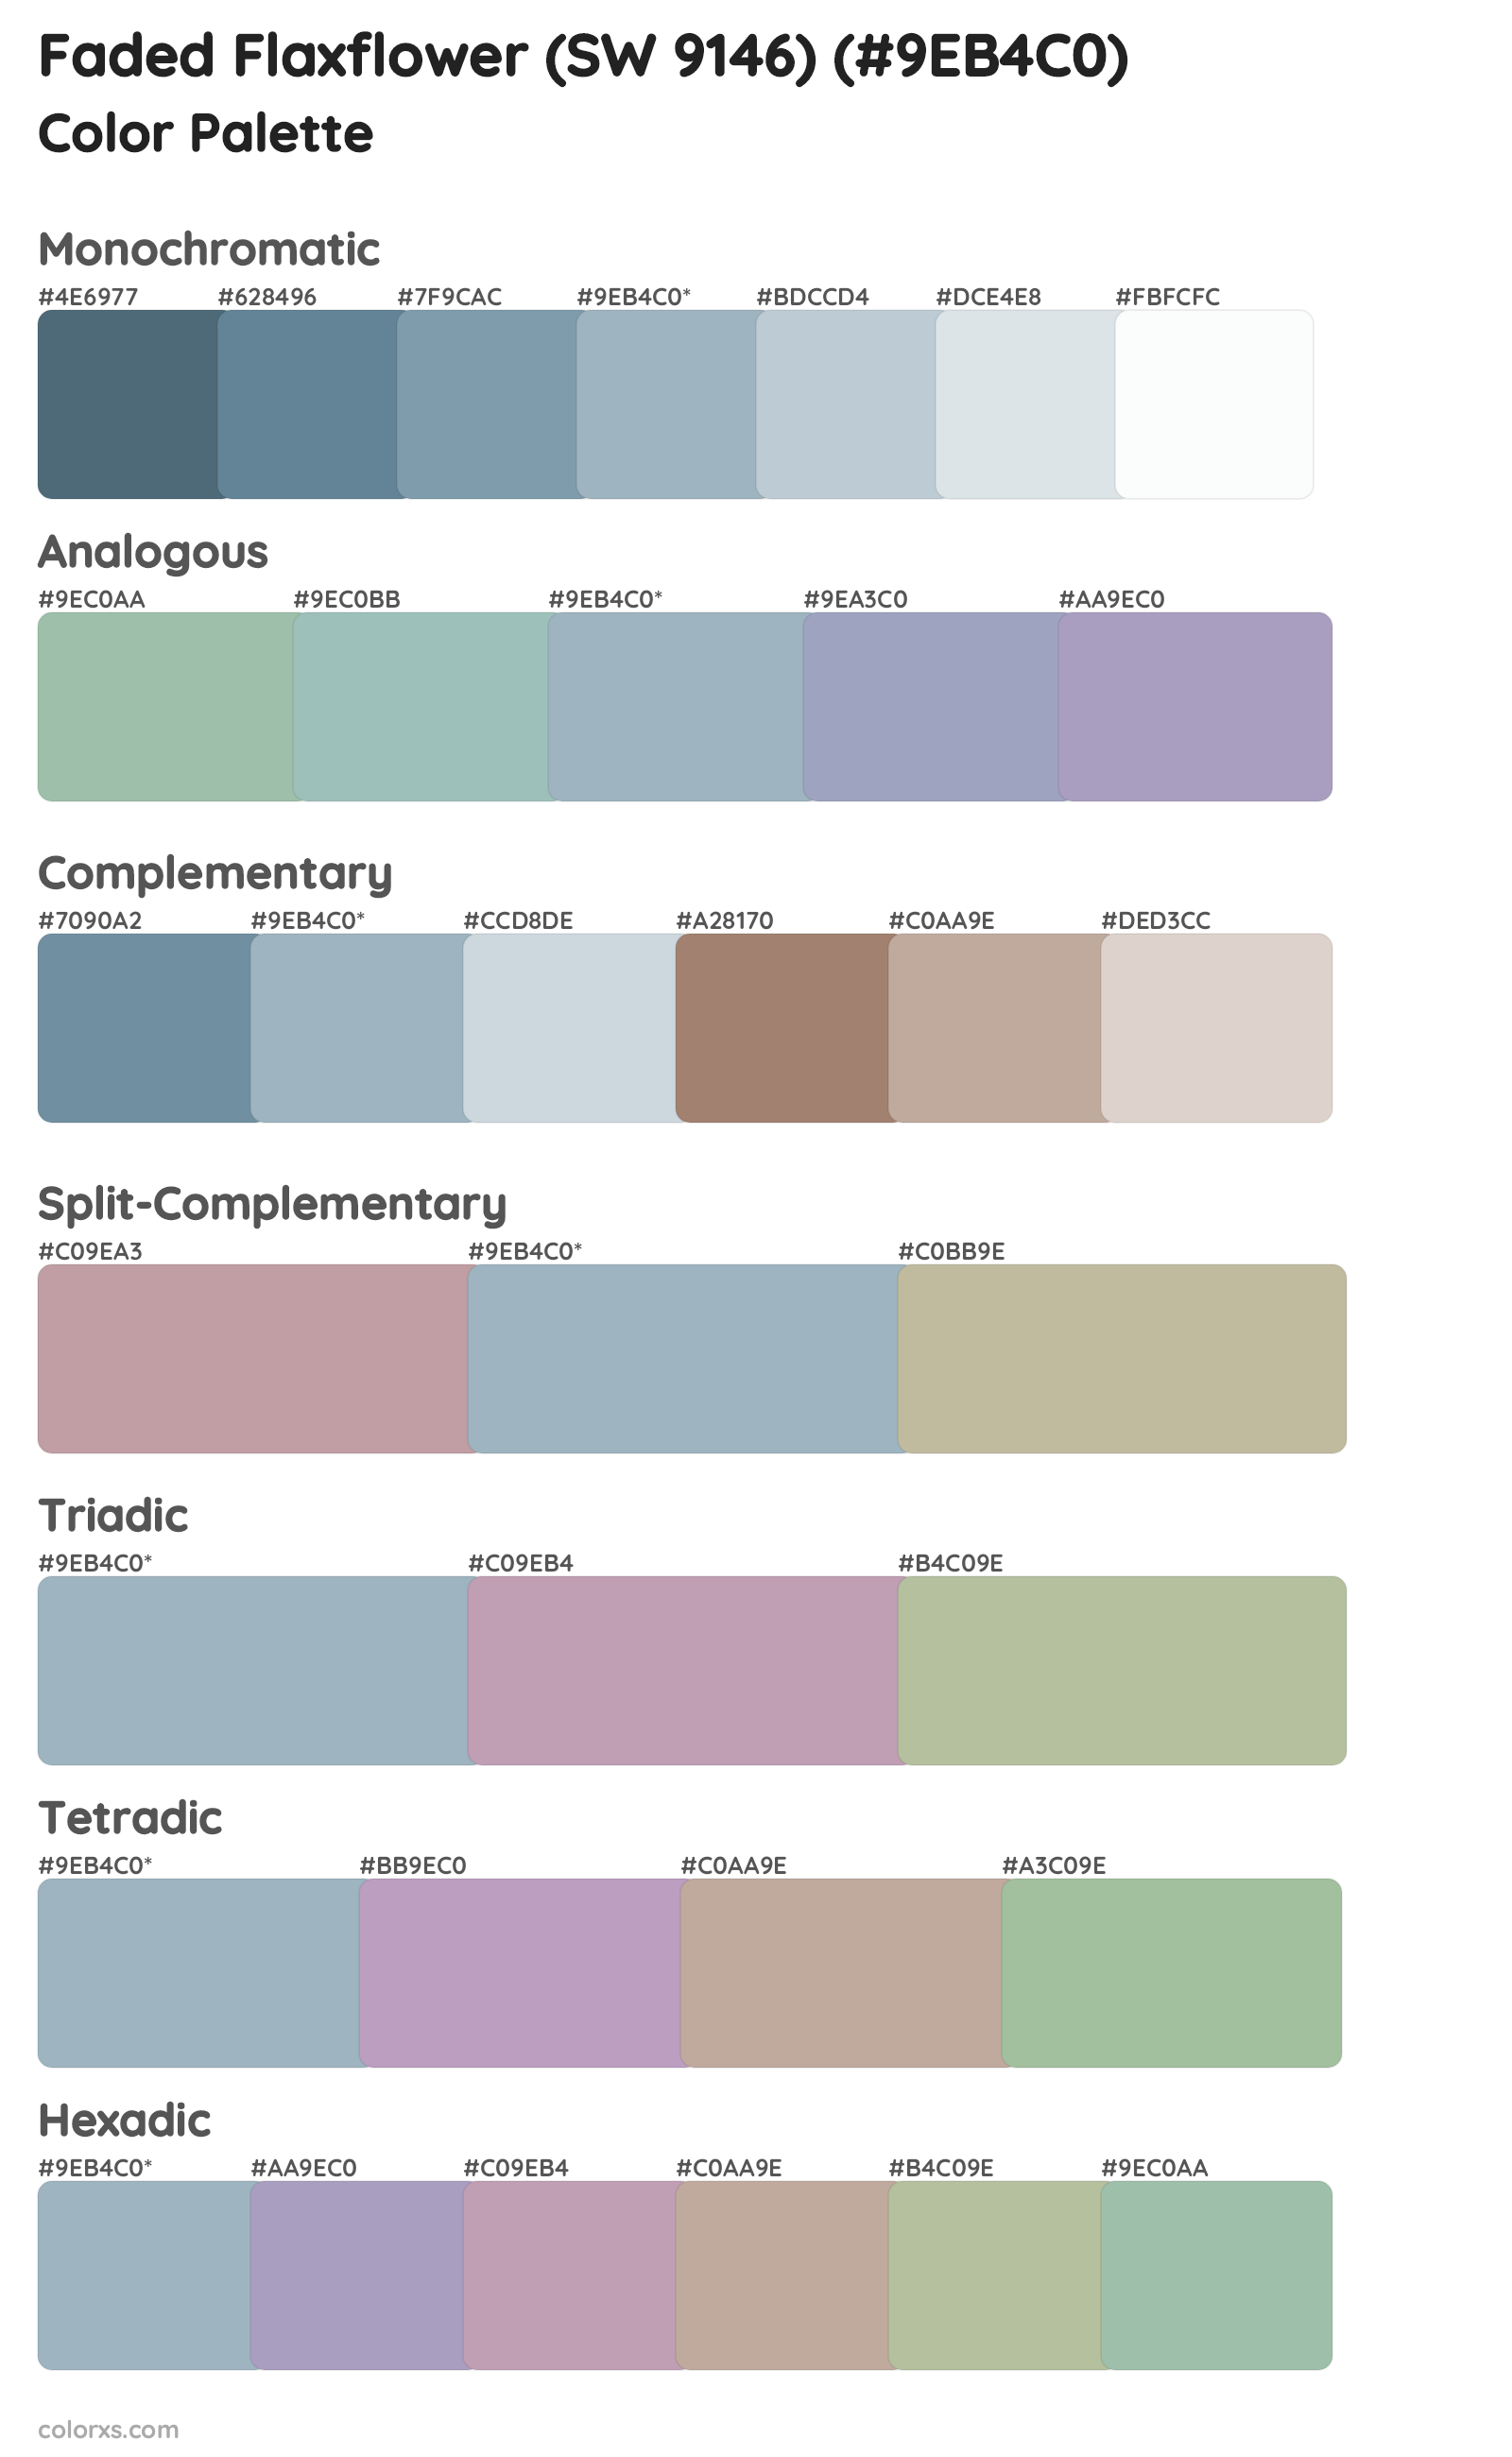 Faded Flaxflower (SW 9146) Color Scheme Palettes